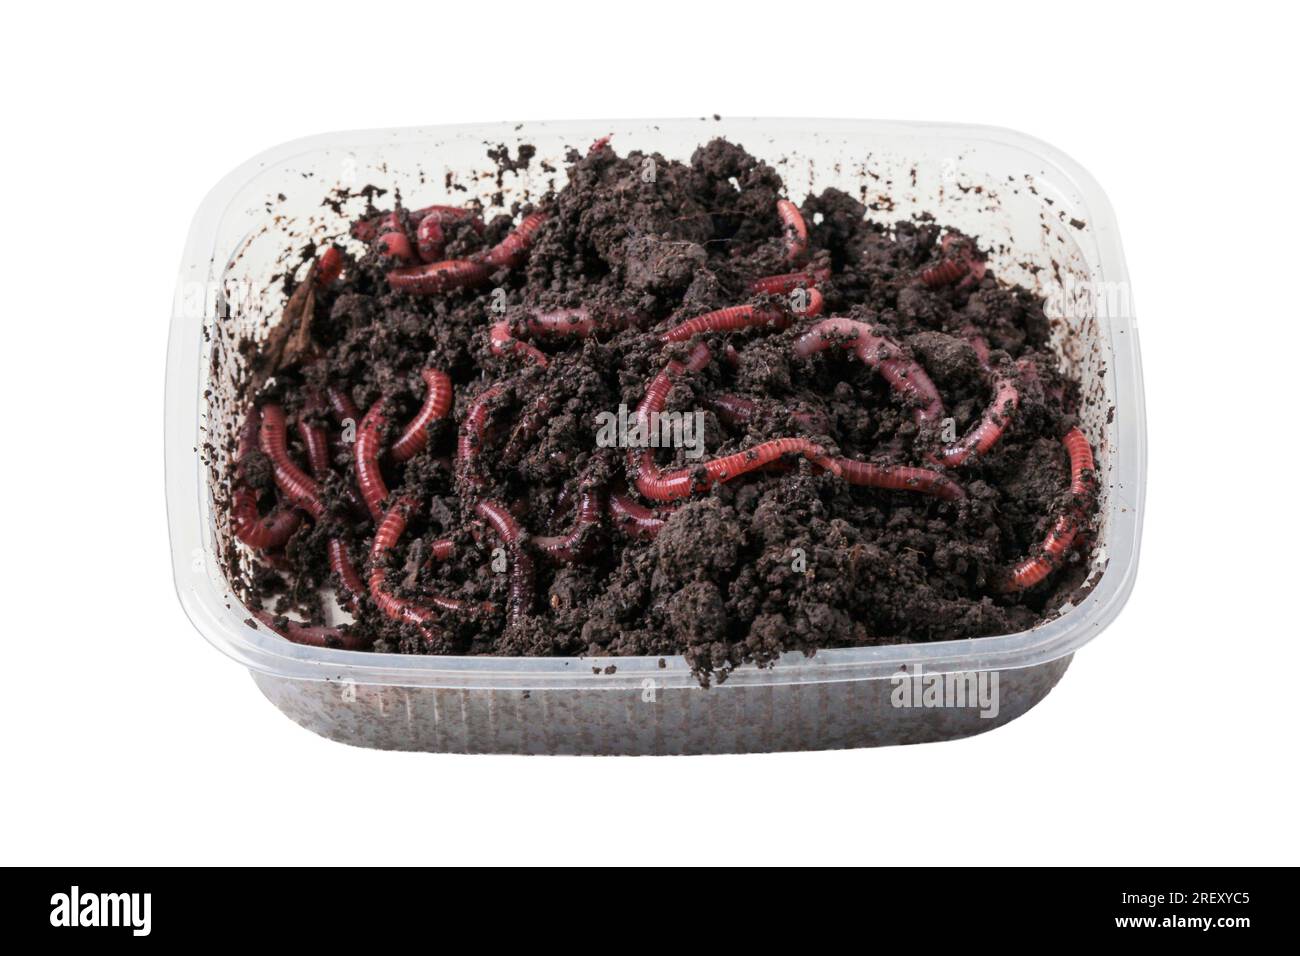 Worms soil Cut Out Stock Images & Pictures - Alamy